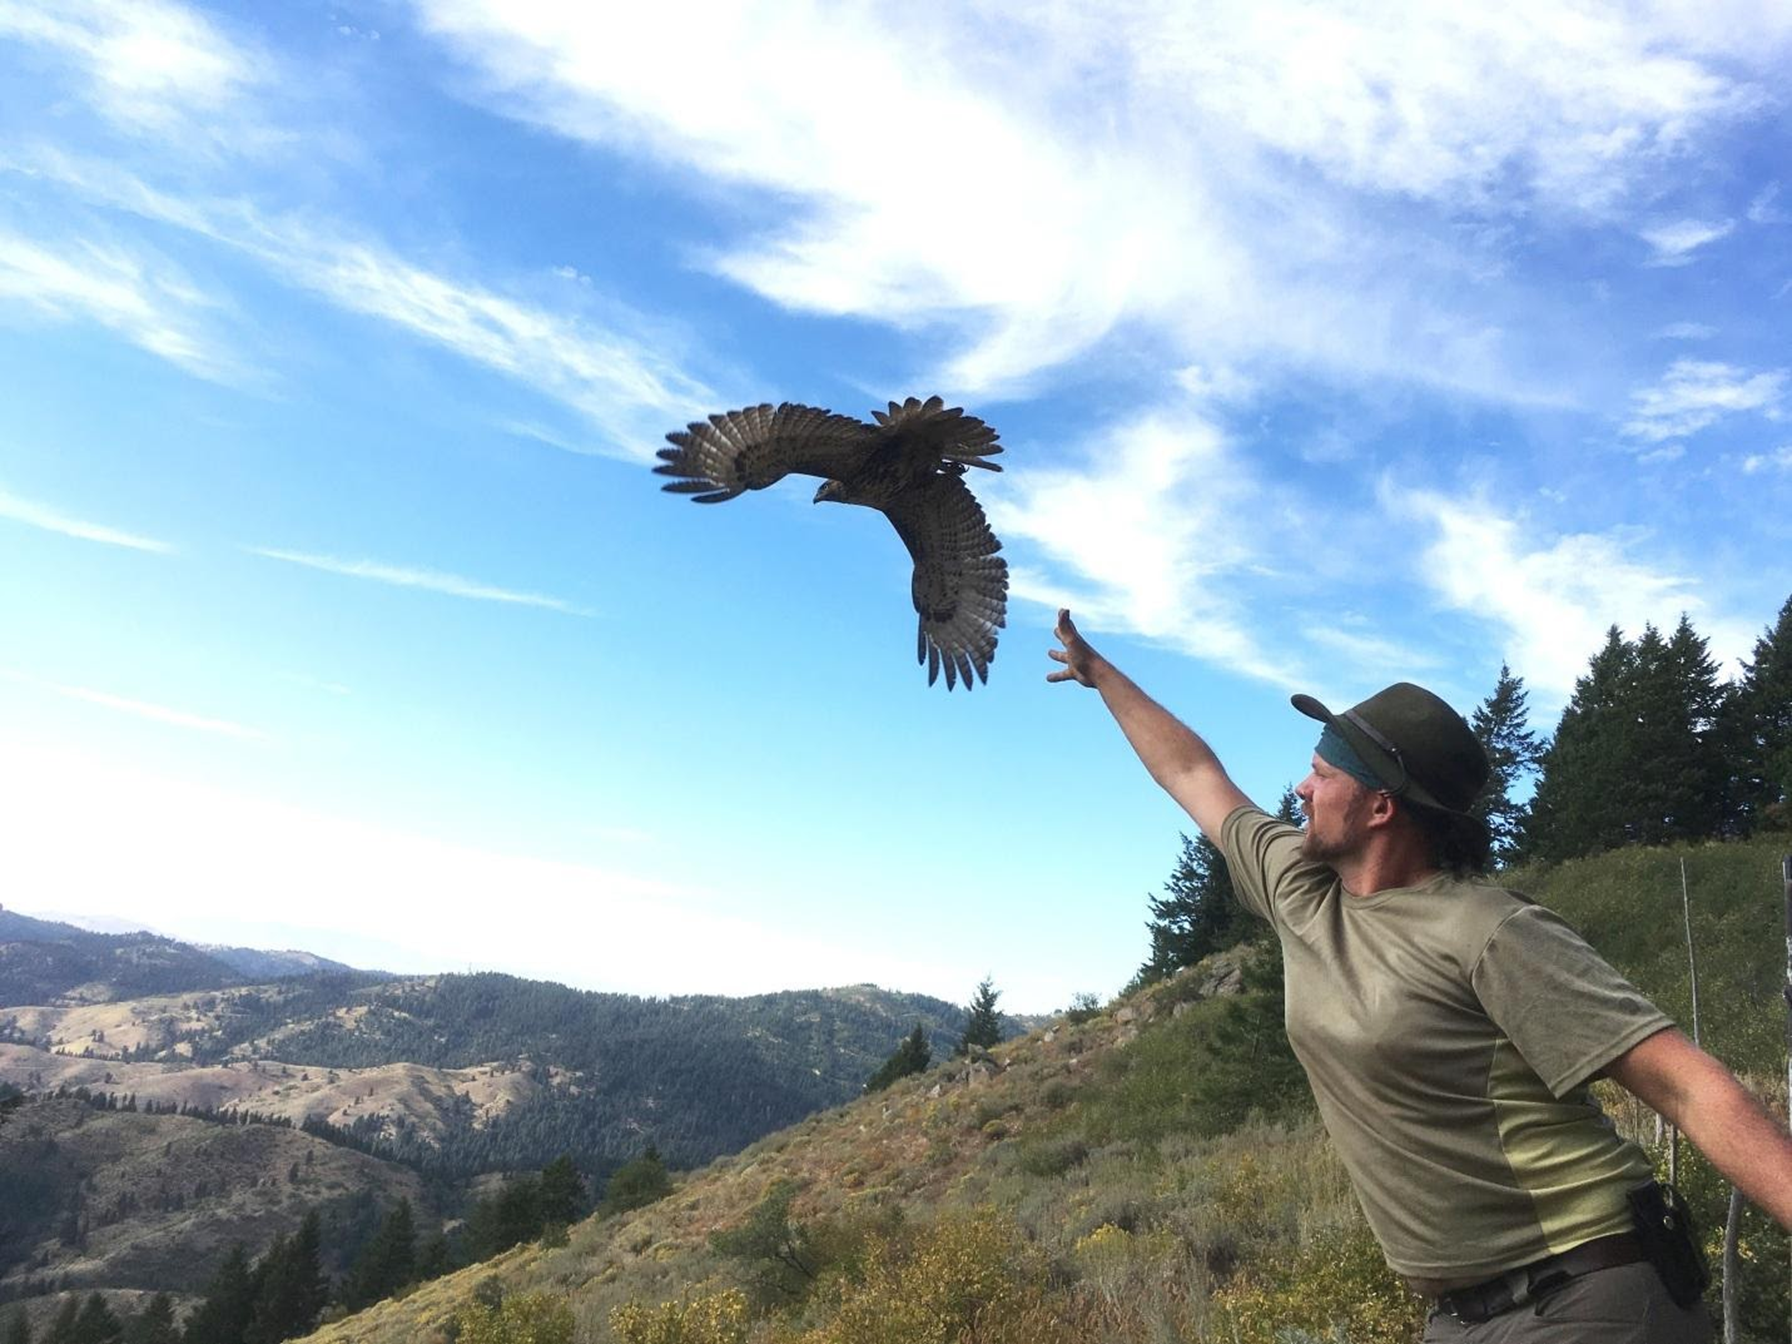 a young biologist stands with his arm outstretched and hand open. a red tailed hawk with wings spread flies away with an expansive blue sky and the Boise mountains in the background